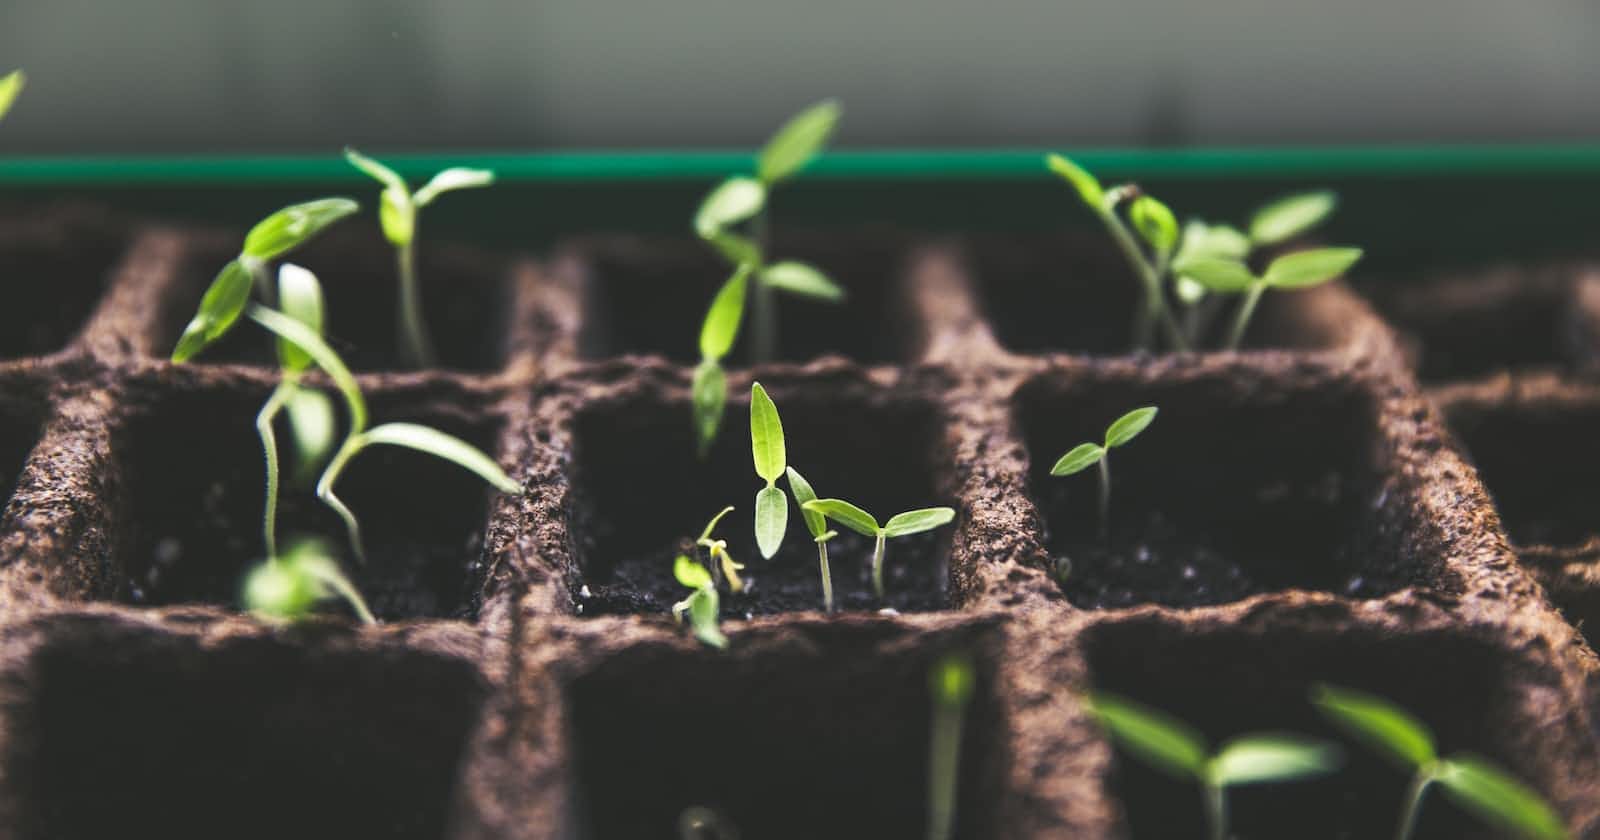 From Engineering to Software Development: Embracing the "Software Gardening" Mindset